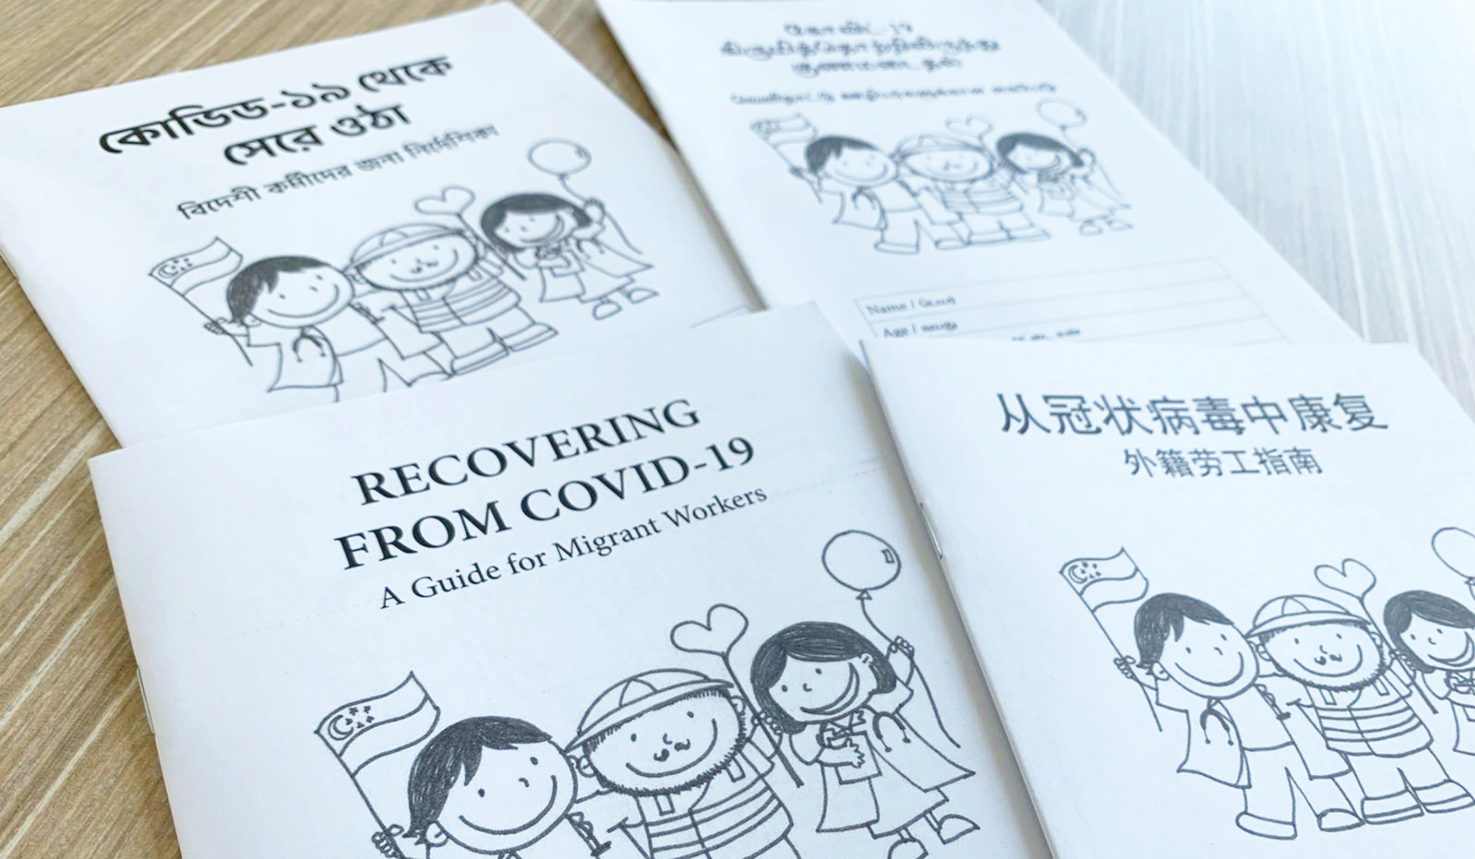 Photo of health booklets produced by volunteers from Kitesong Global.